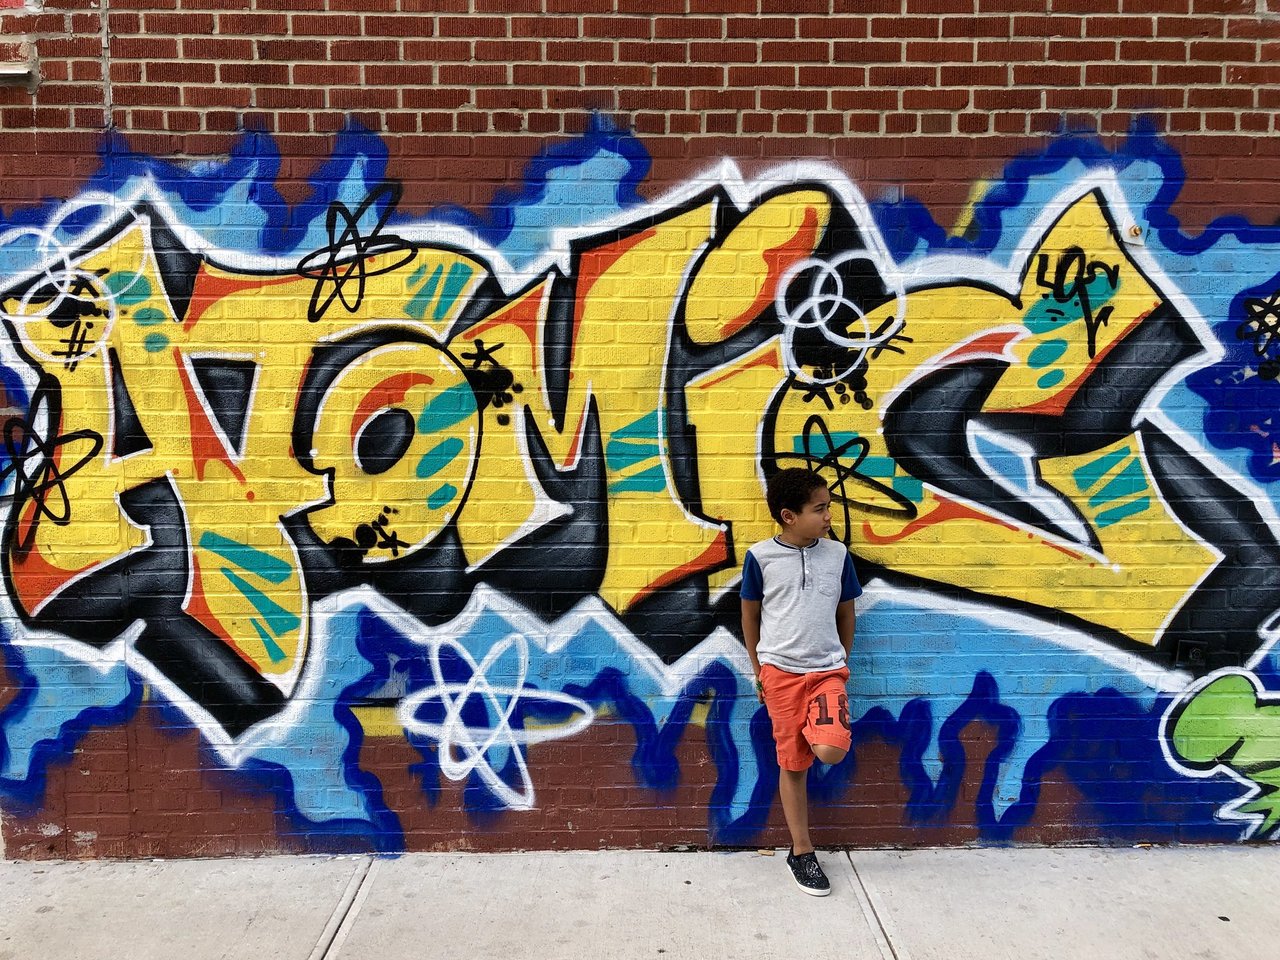 Just wrapped filming a new project in #Brooklyn  Wish I could say more... 🤐 Stay tuned!!! #actor #work #nextlevel #atomic #graffiti #art https://t.co/ecJTmrmnoD